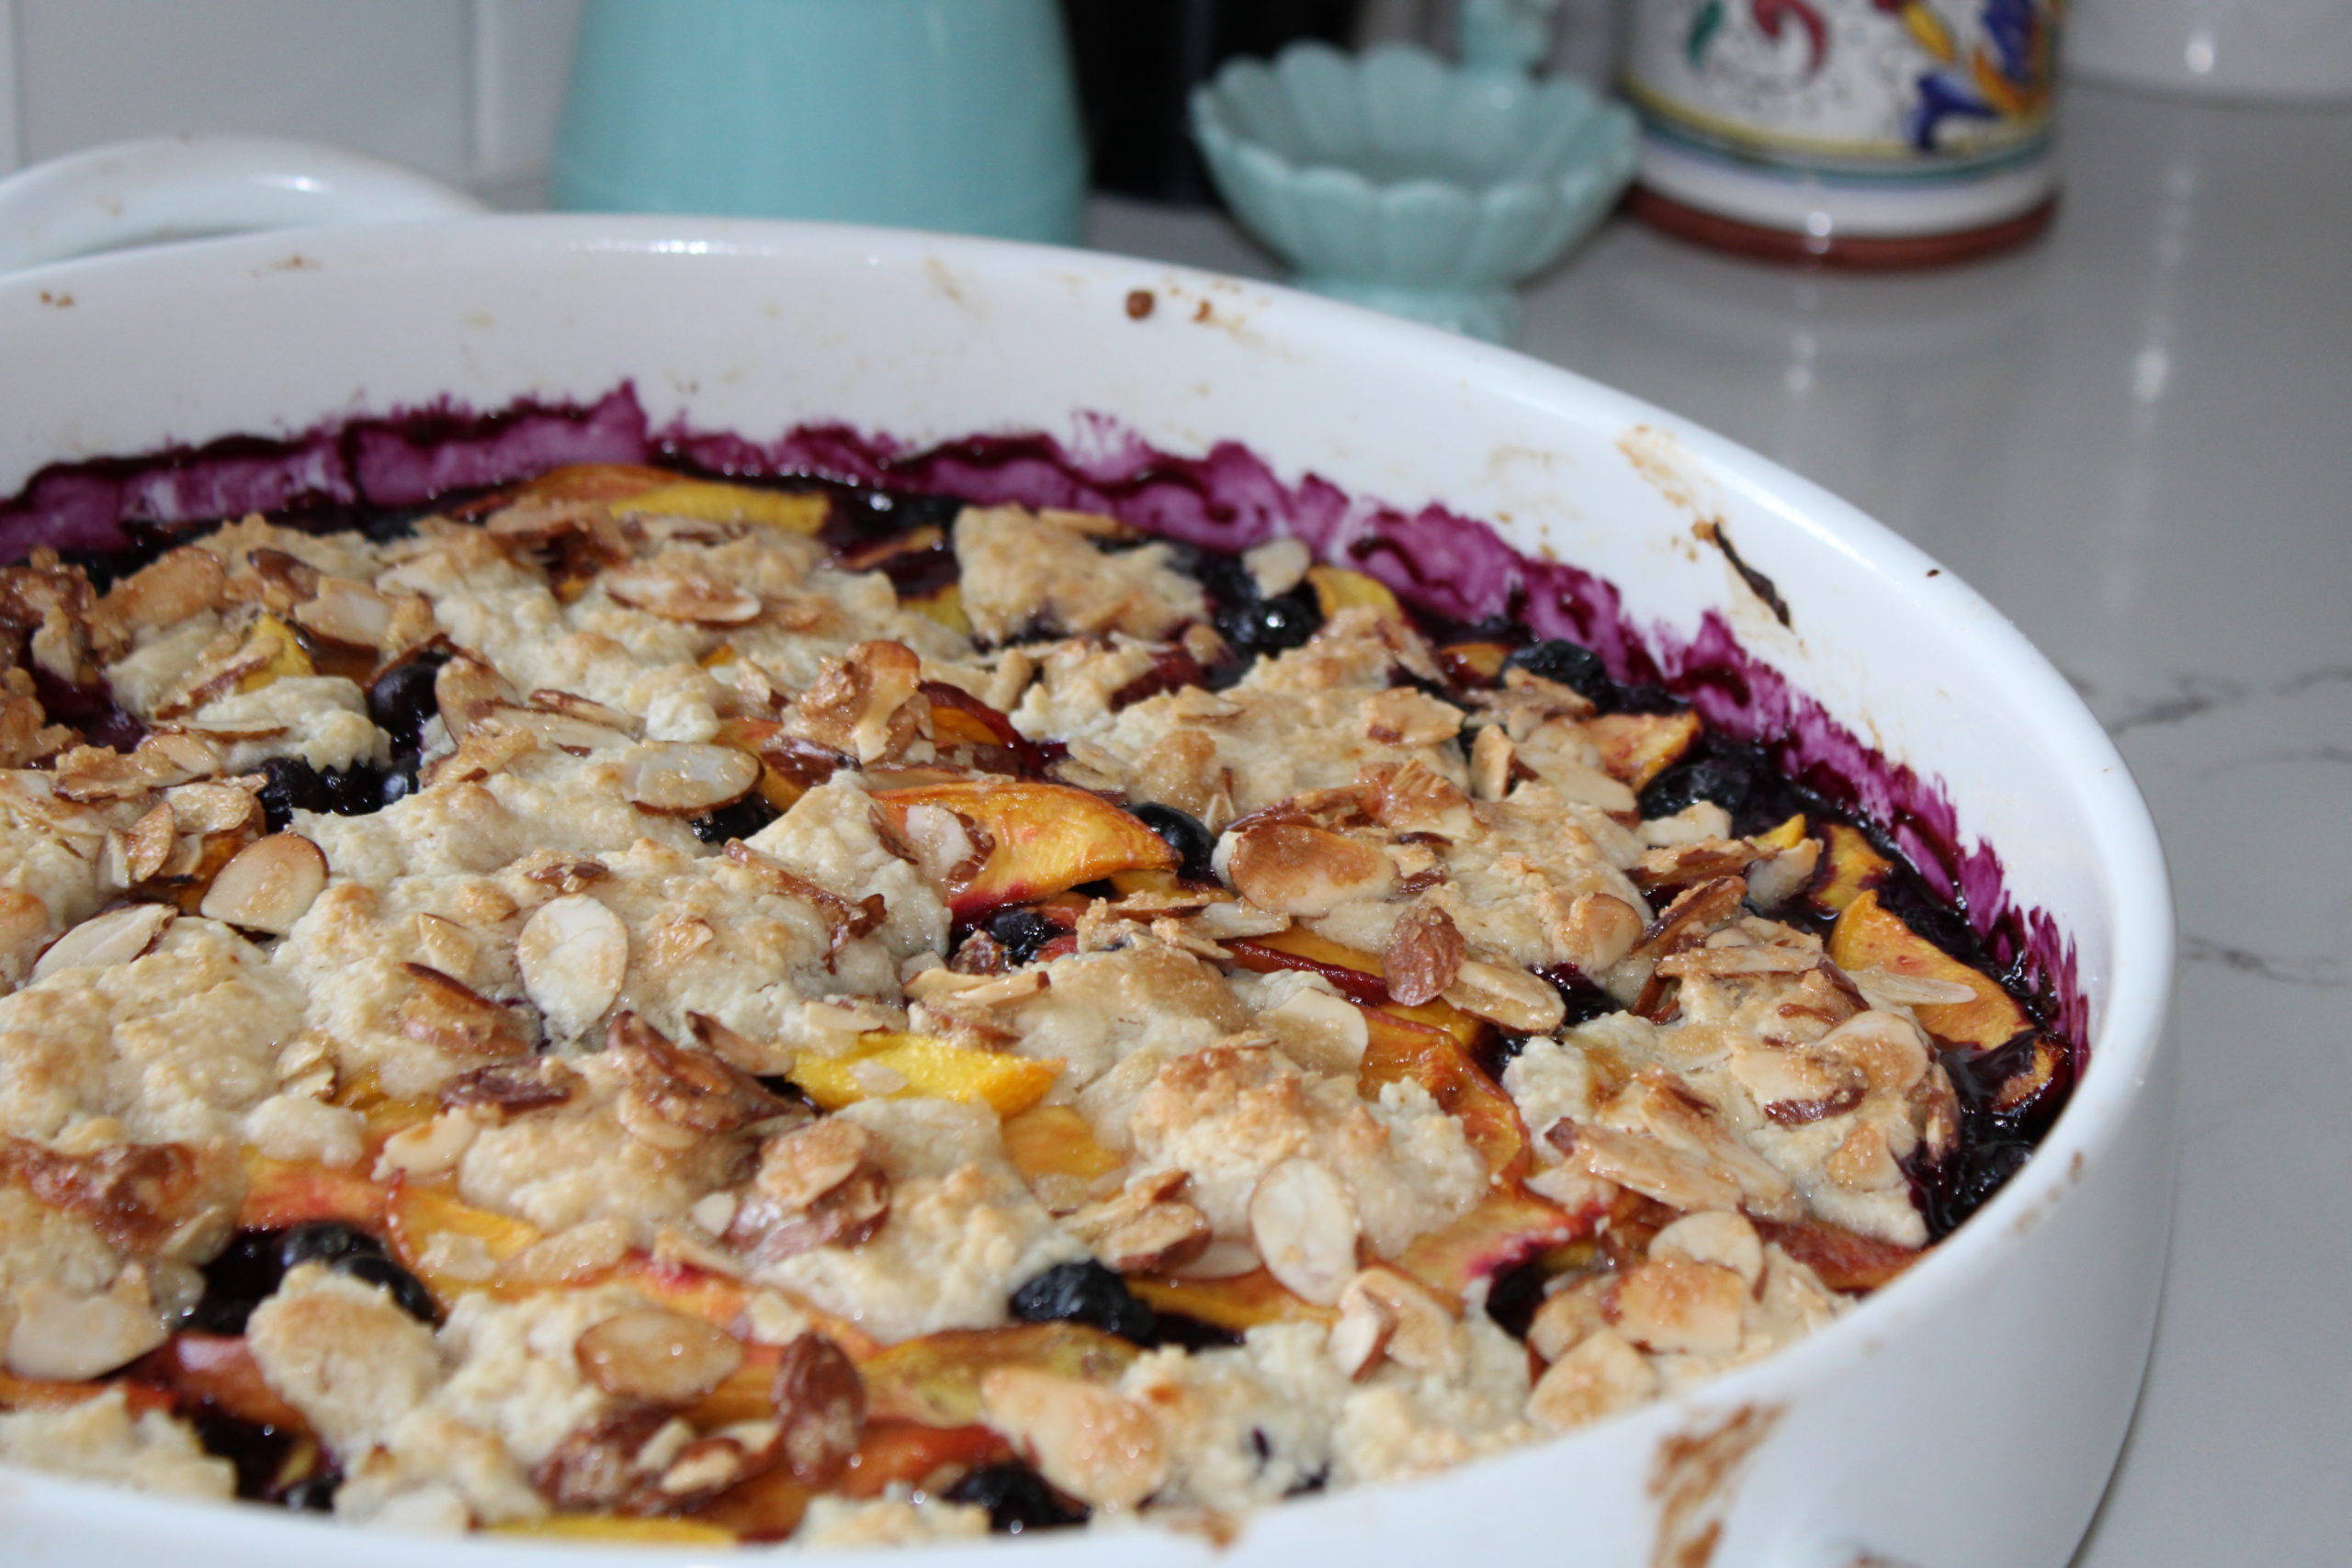 Mixed Fruit Cobbler with Sugared Almonds